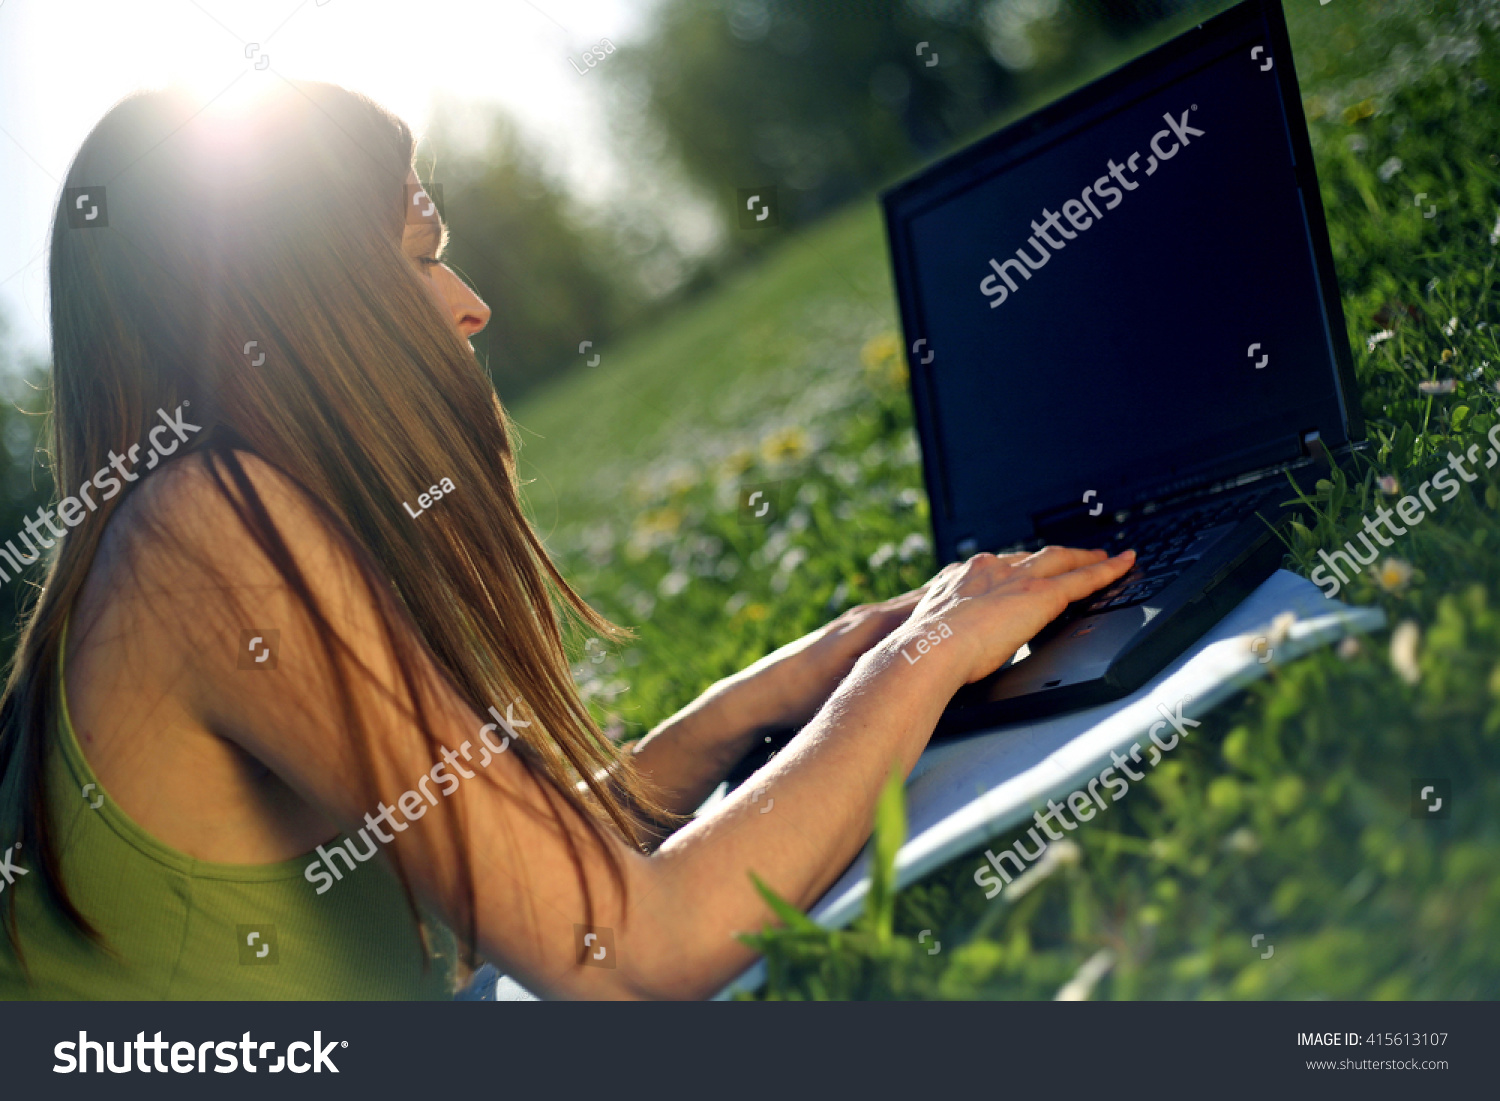 Girl working on laptop in nature #415613107